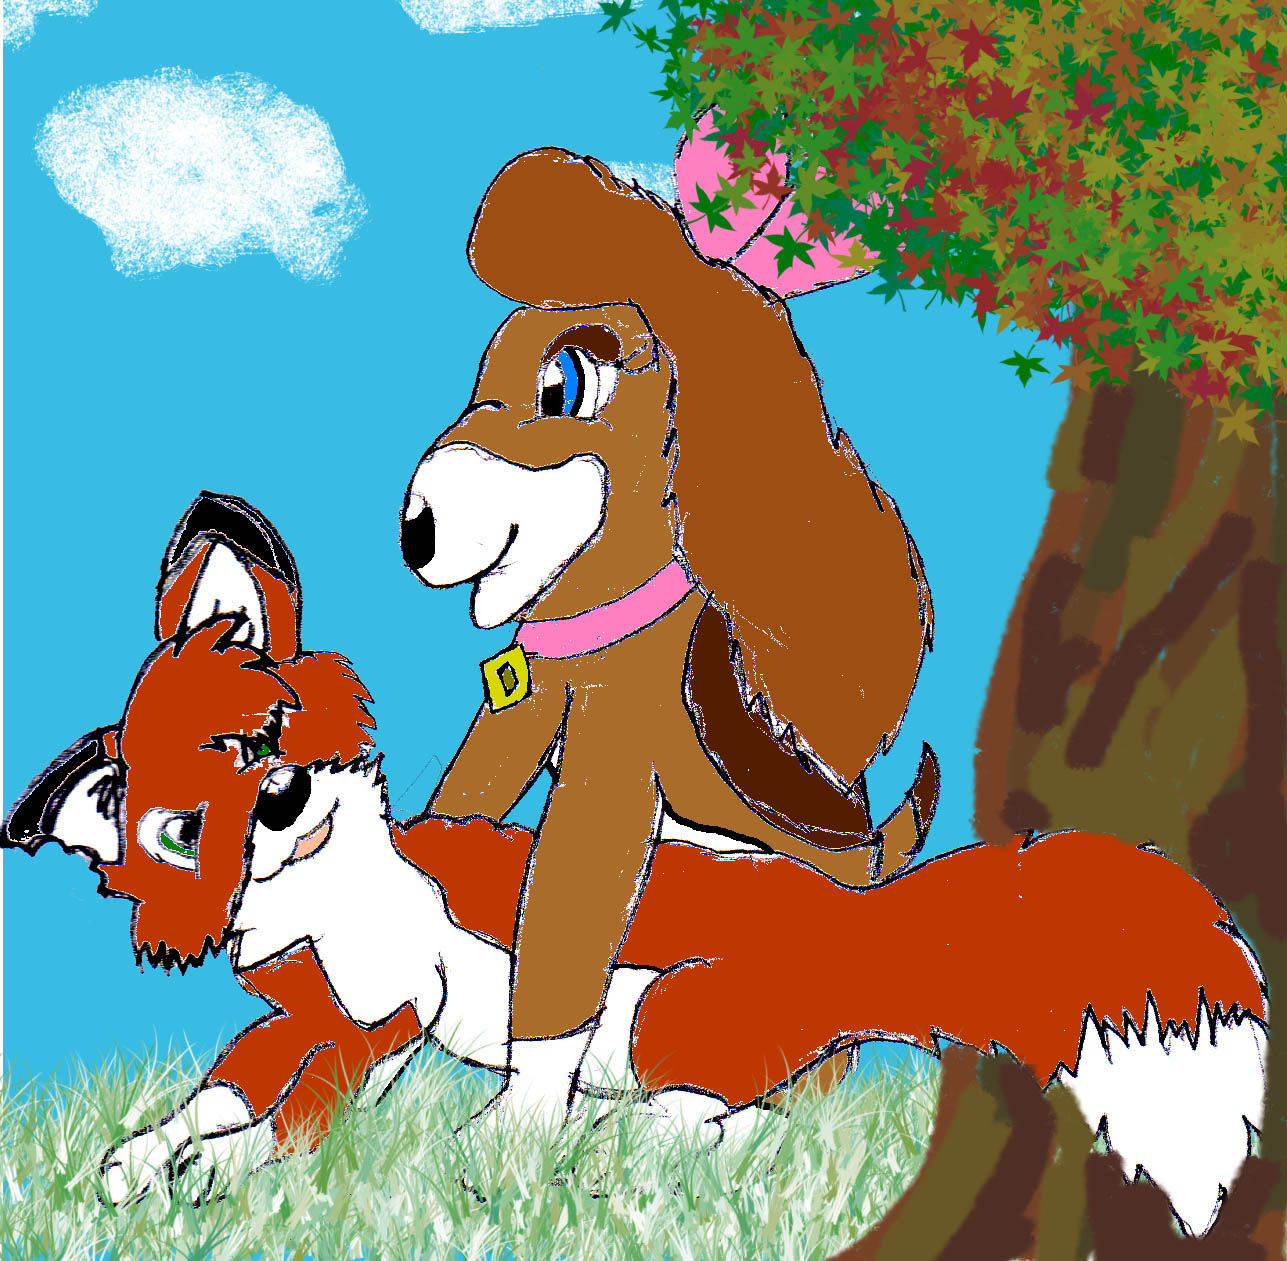 Oliver And Rapsody *Request From AquaBerry15 For Winning The Name Contest!* by ginathehedgehog